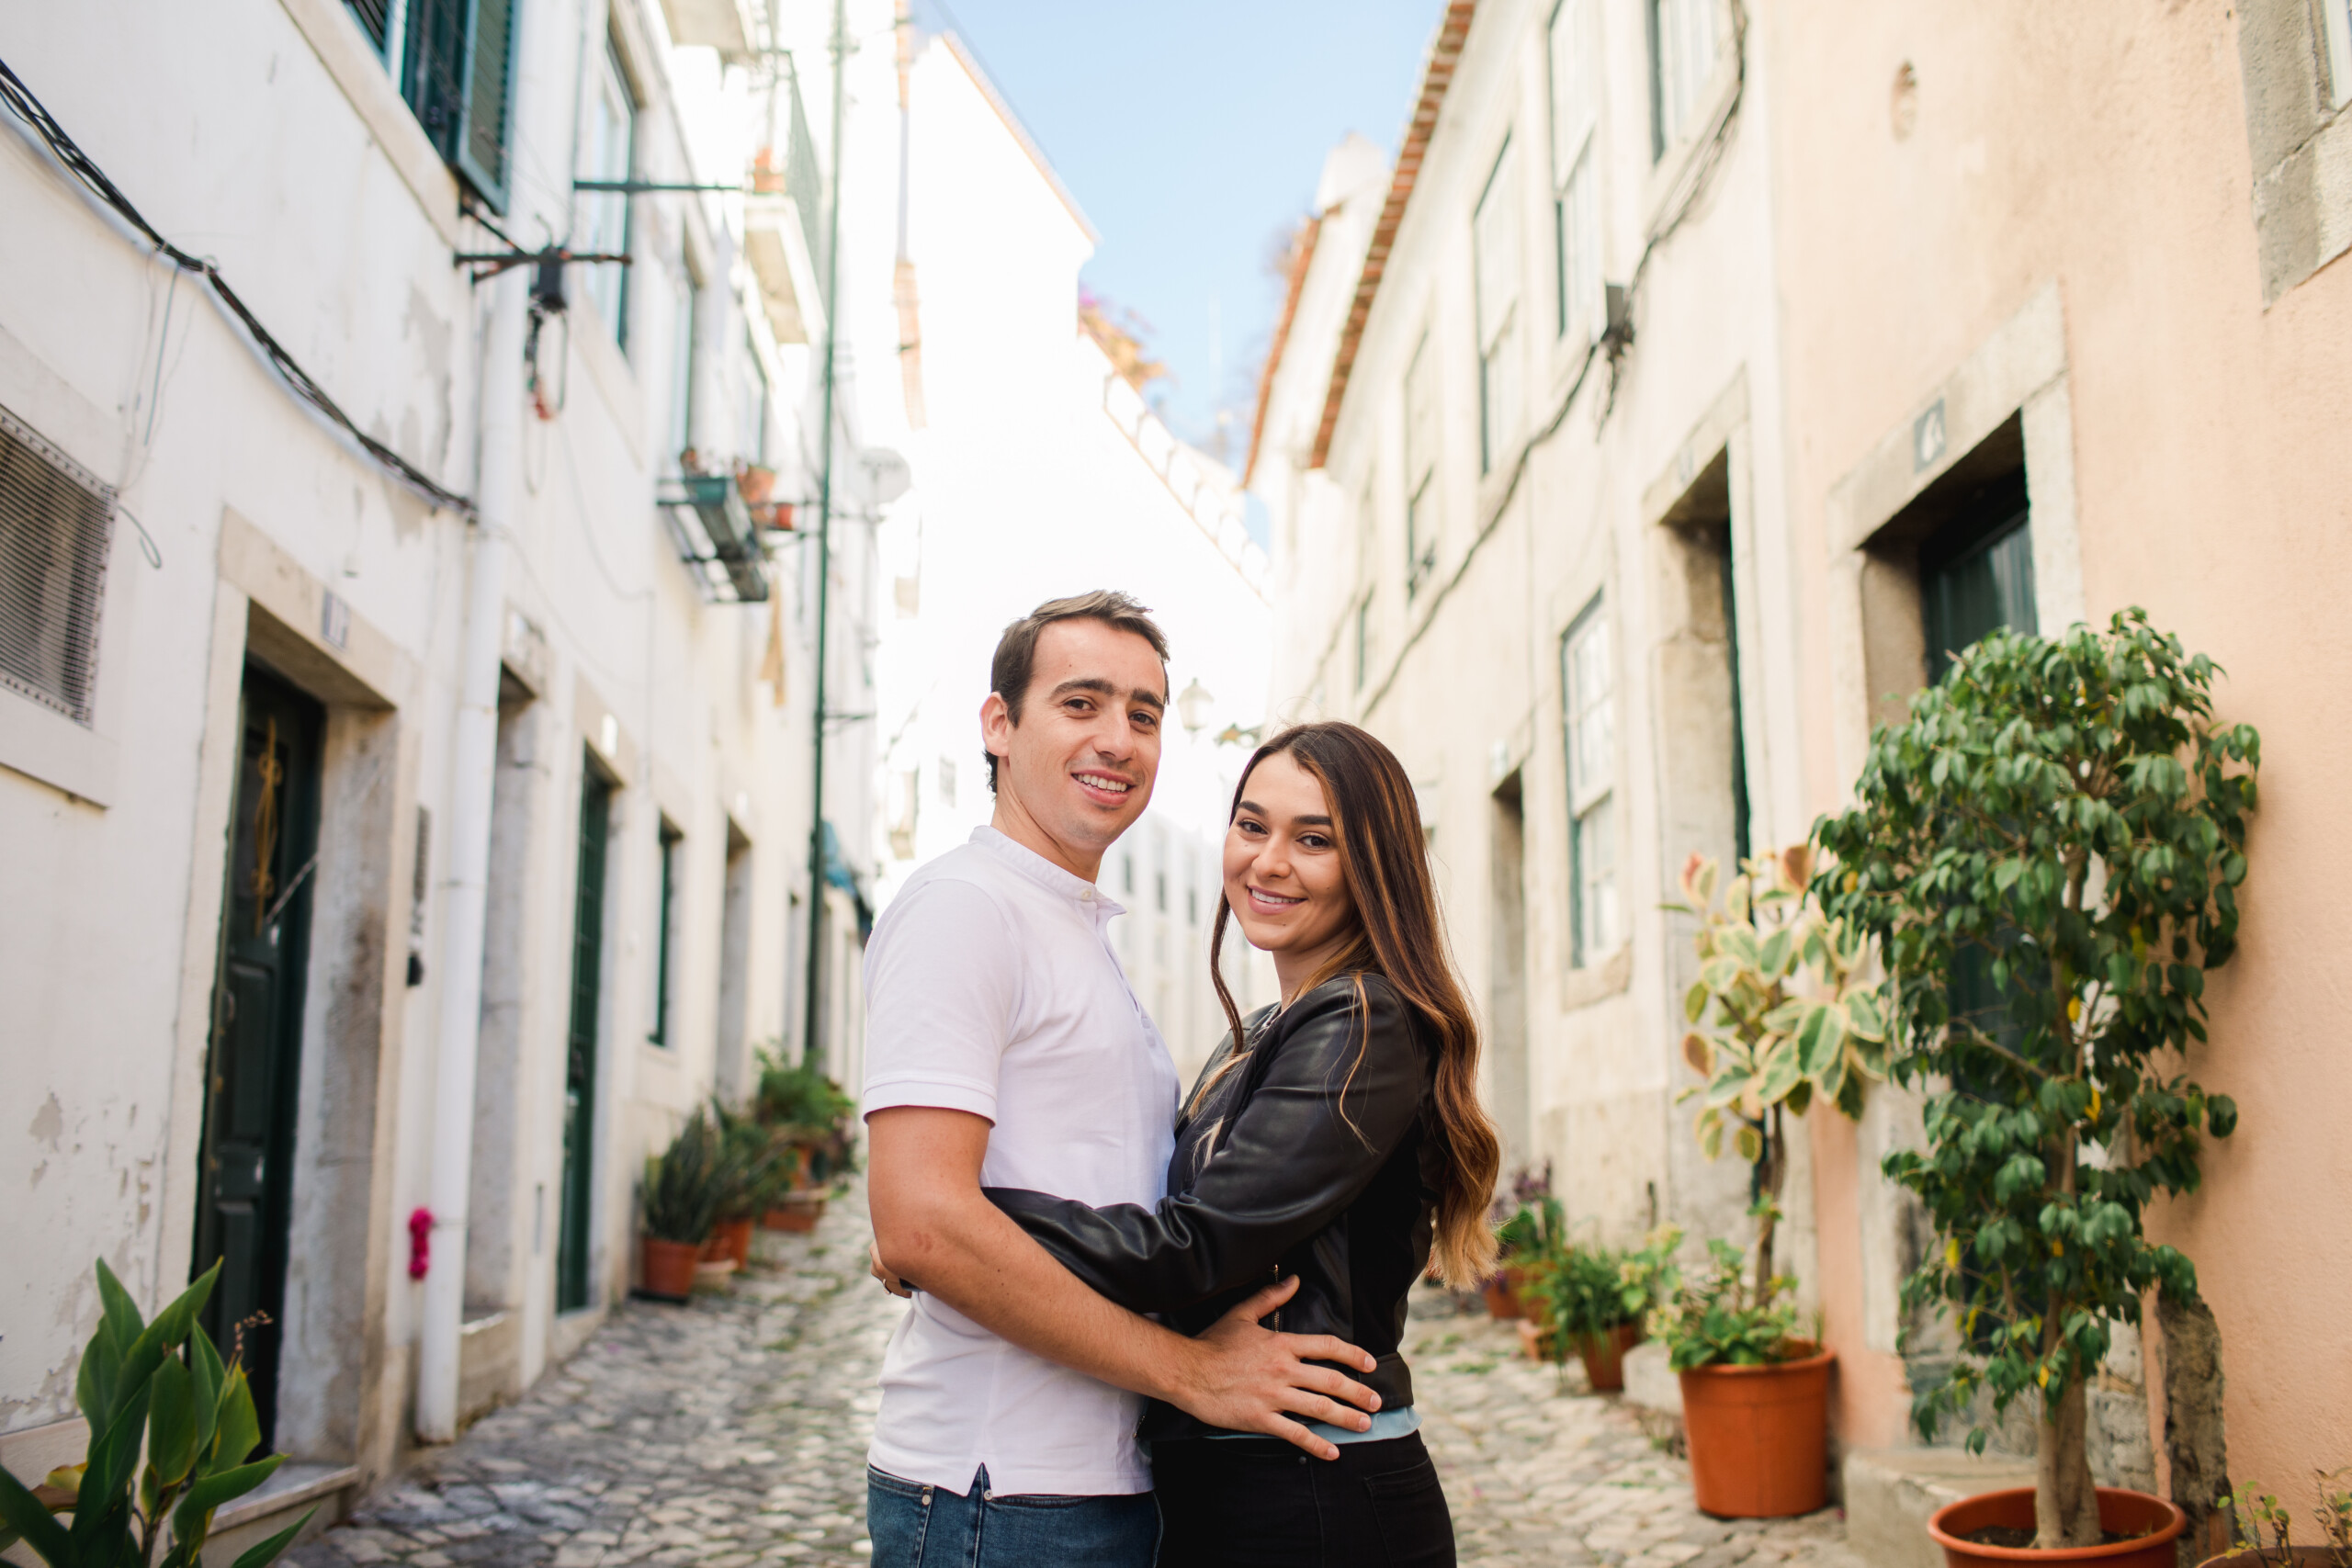 Engagement photoshoot by Daniela, Localgrapher in Lisbon